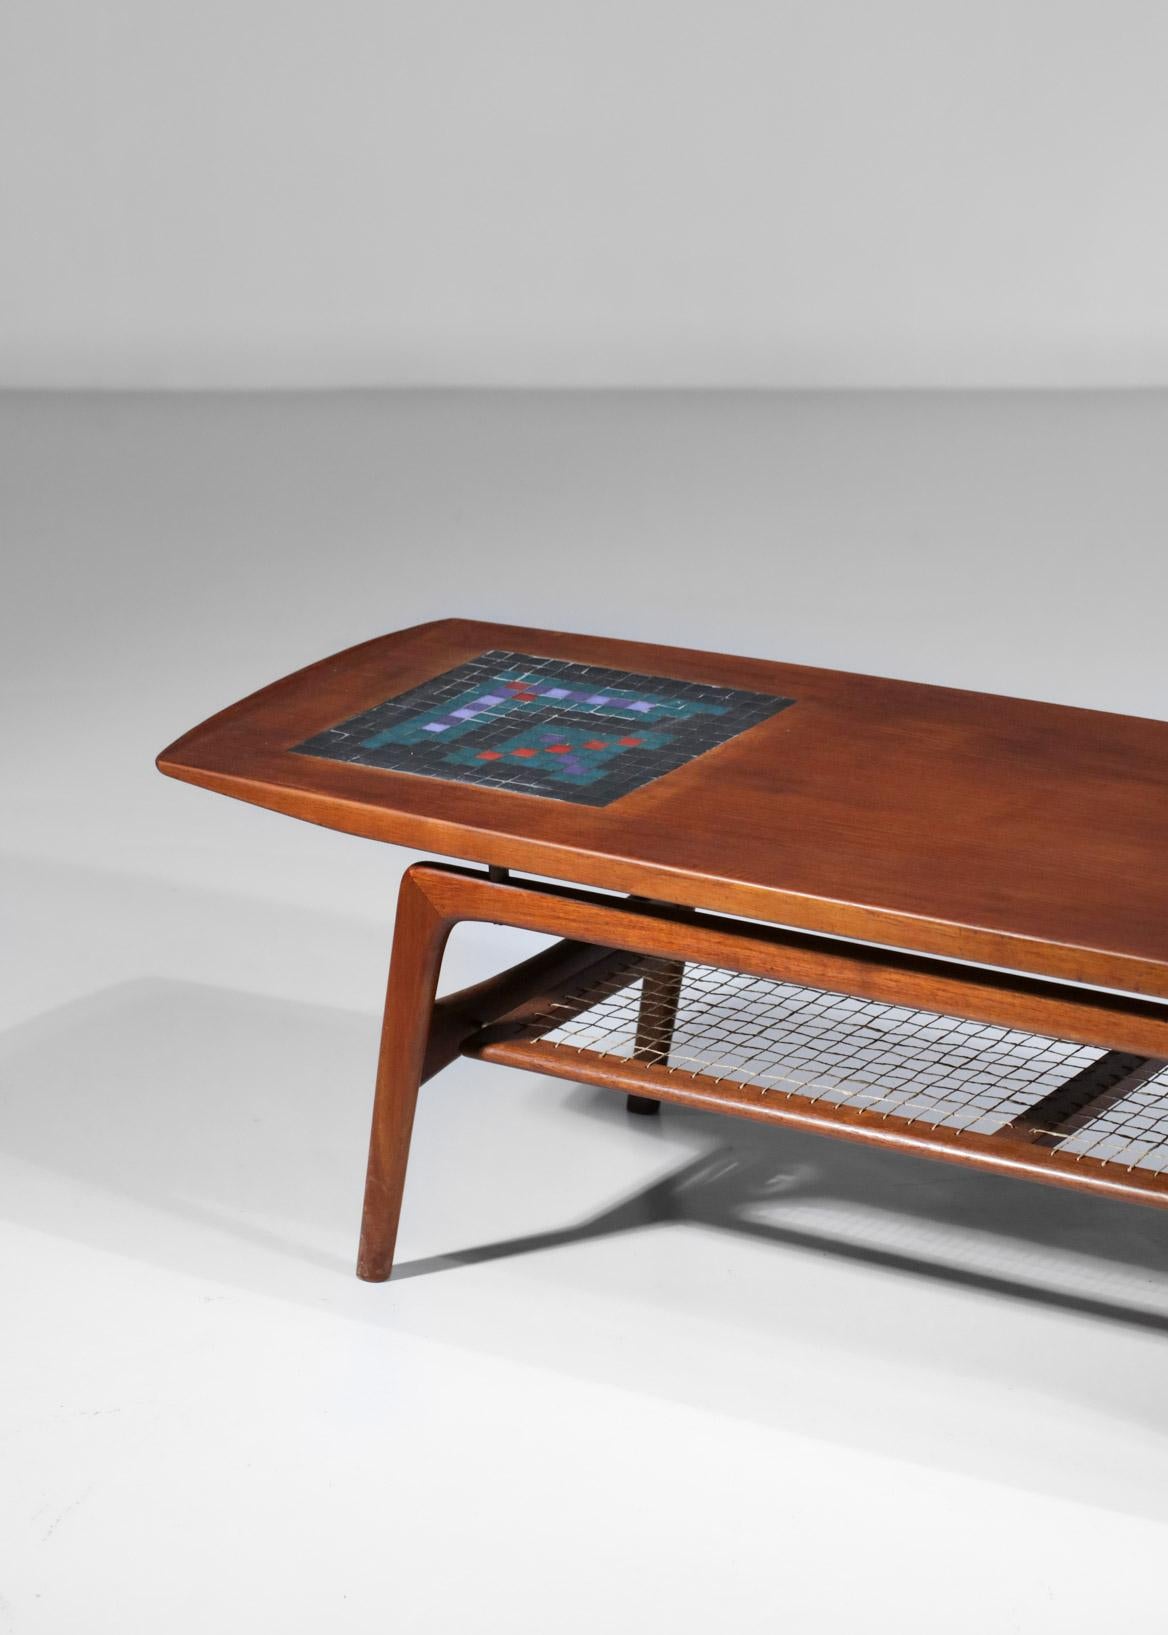 Scandinavian 60's coffee table by Danish designer Arne Hovmand Olsen for Mogens Kold. Structure in solid teak and veneer, inlaid with a ceramic mosaic on the top of the tabletop resting on a nice solid teak base quite typical of the Scandinavian